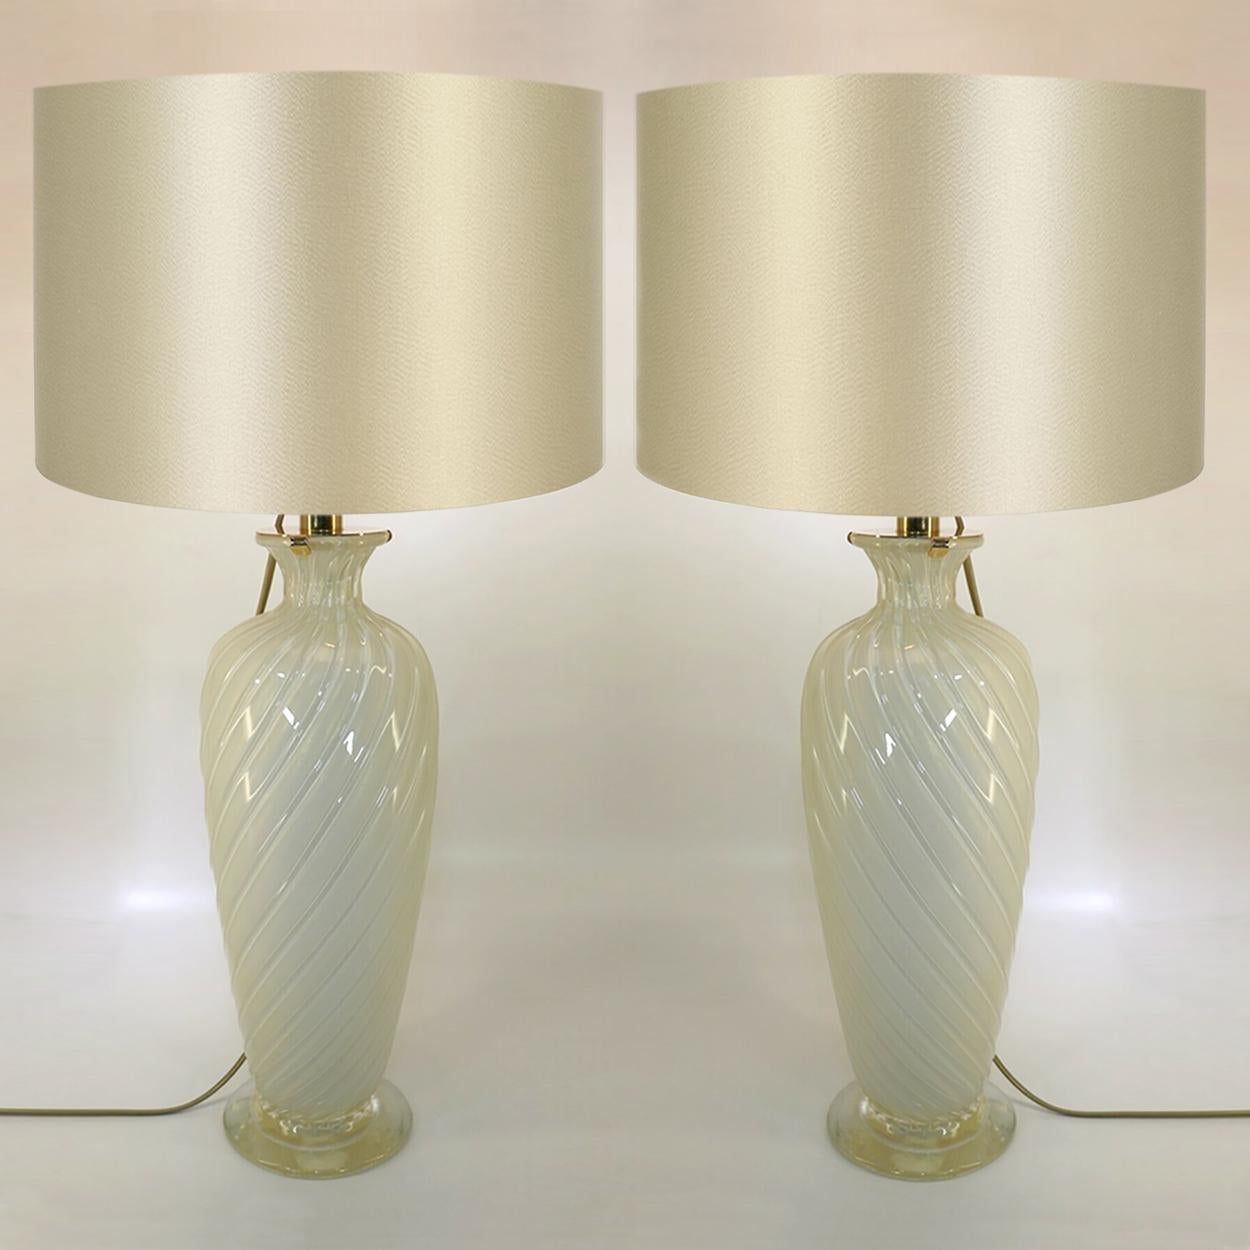 Beautiful pair of lamps. Clear glass inside white underlay with fine gold dust inlay. With light gold colored lamp shades.
Design: Marina Ravagnan Gabbiani.
Measures: Height glass 15.7